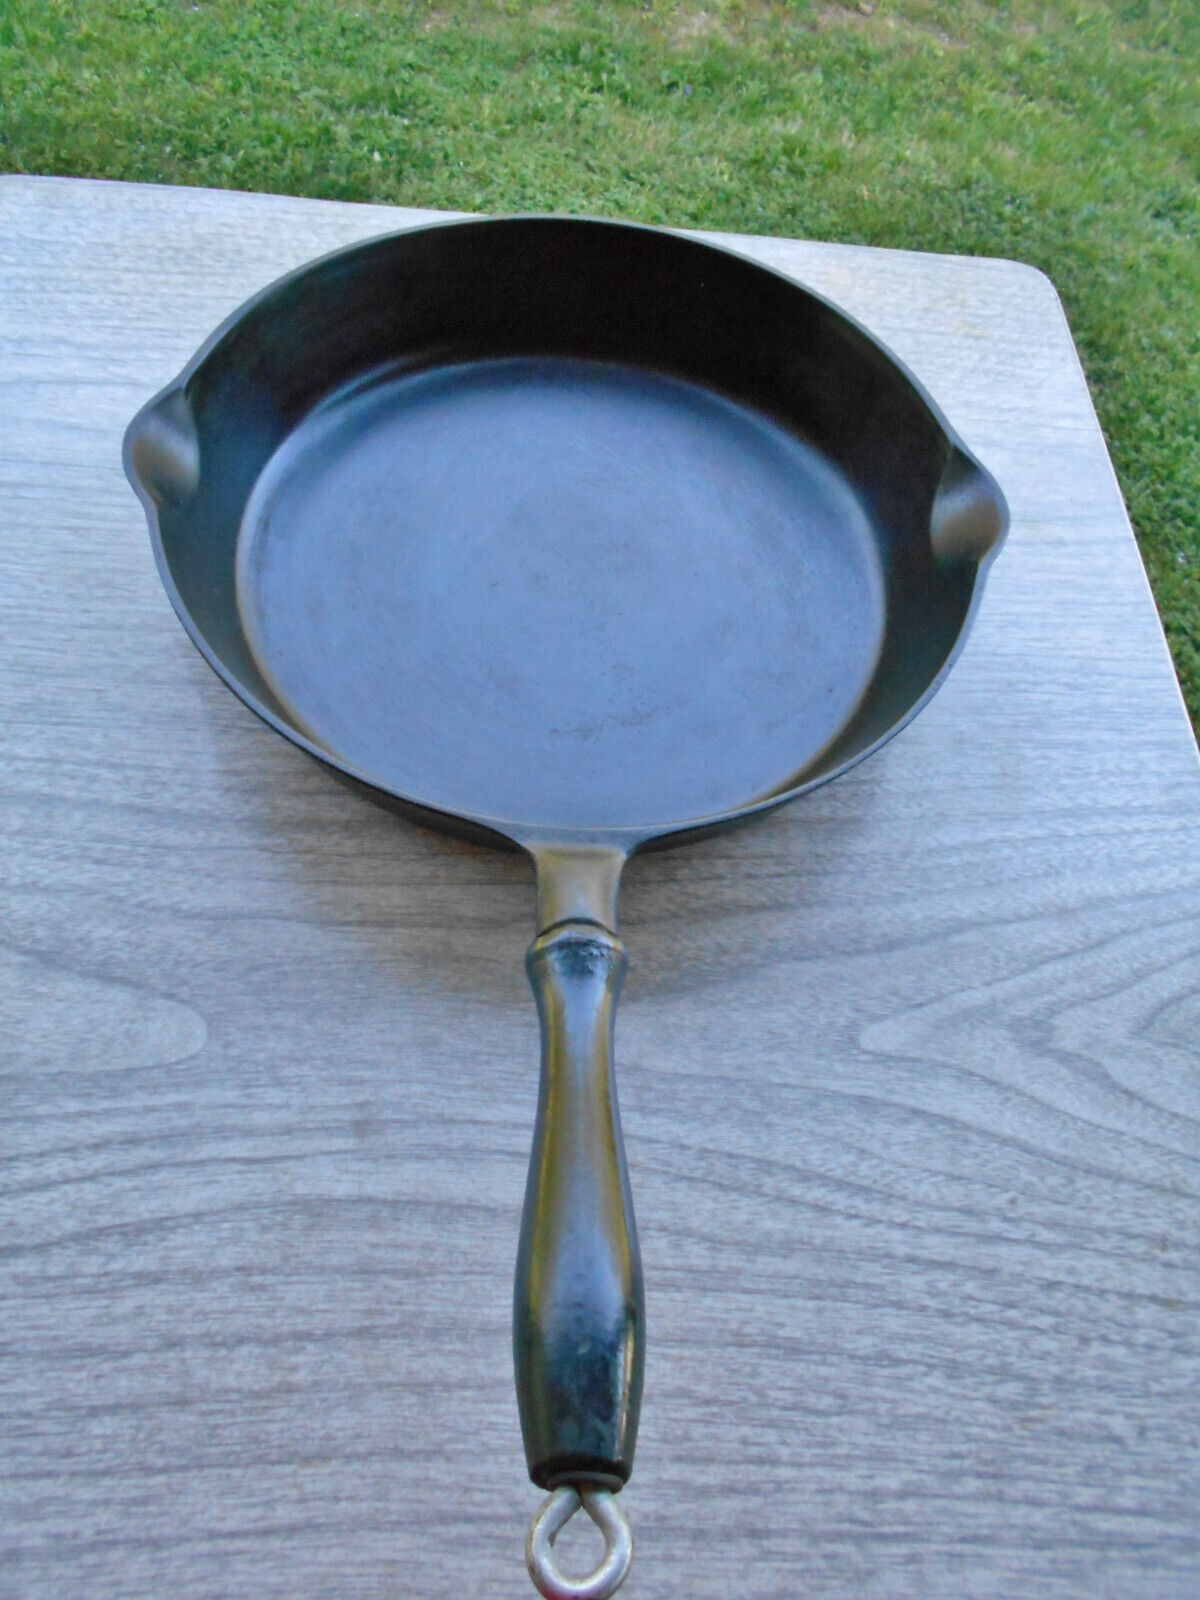 RARE Wagner Ware 1079 Black Cast Iron Wooden Handled Skillet Very Nice 